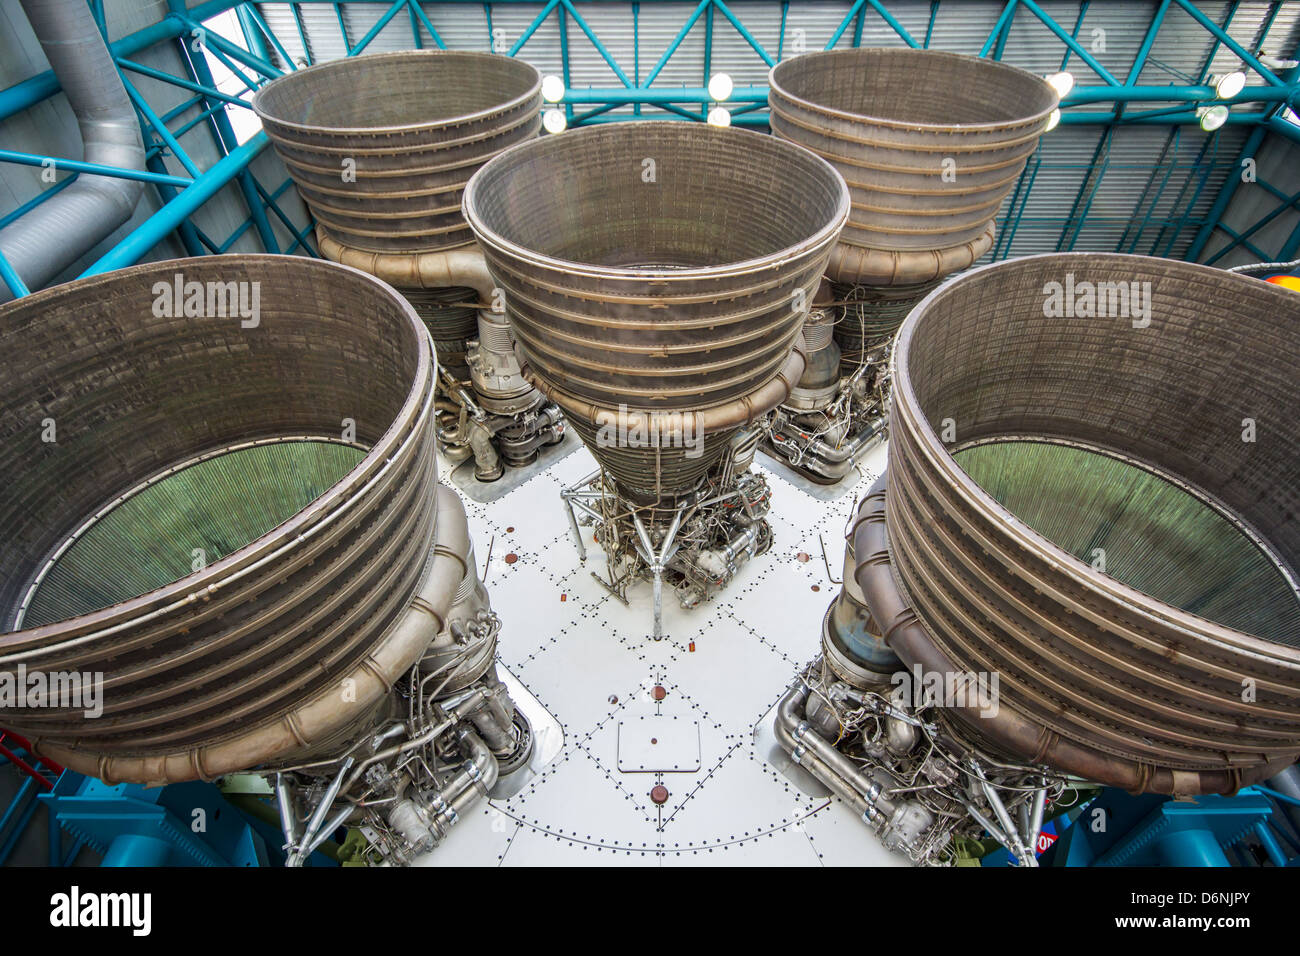 Saturn V Moon Rocket Engines at Kennedy Space Center, Florida. Stock Photo